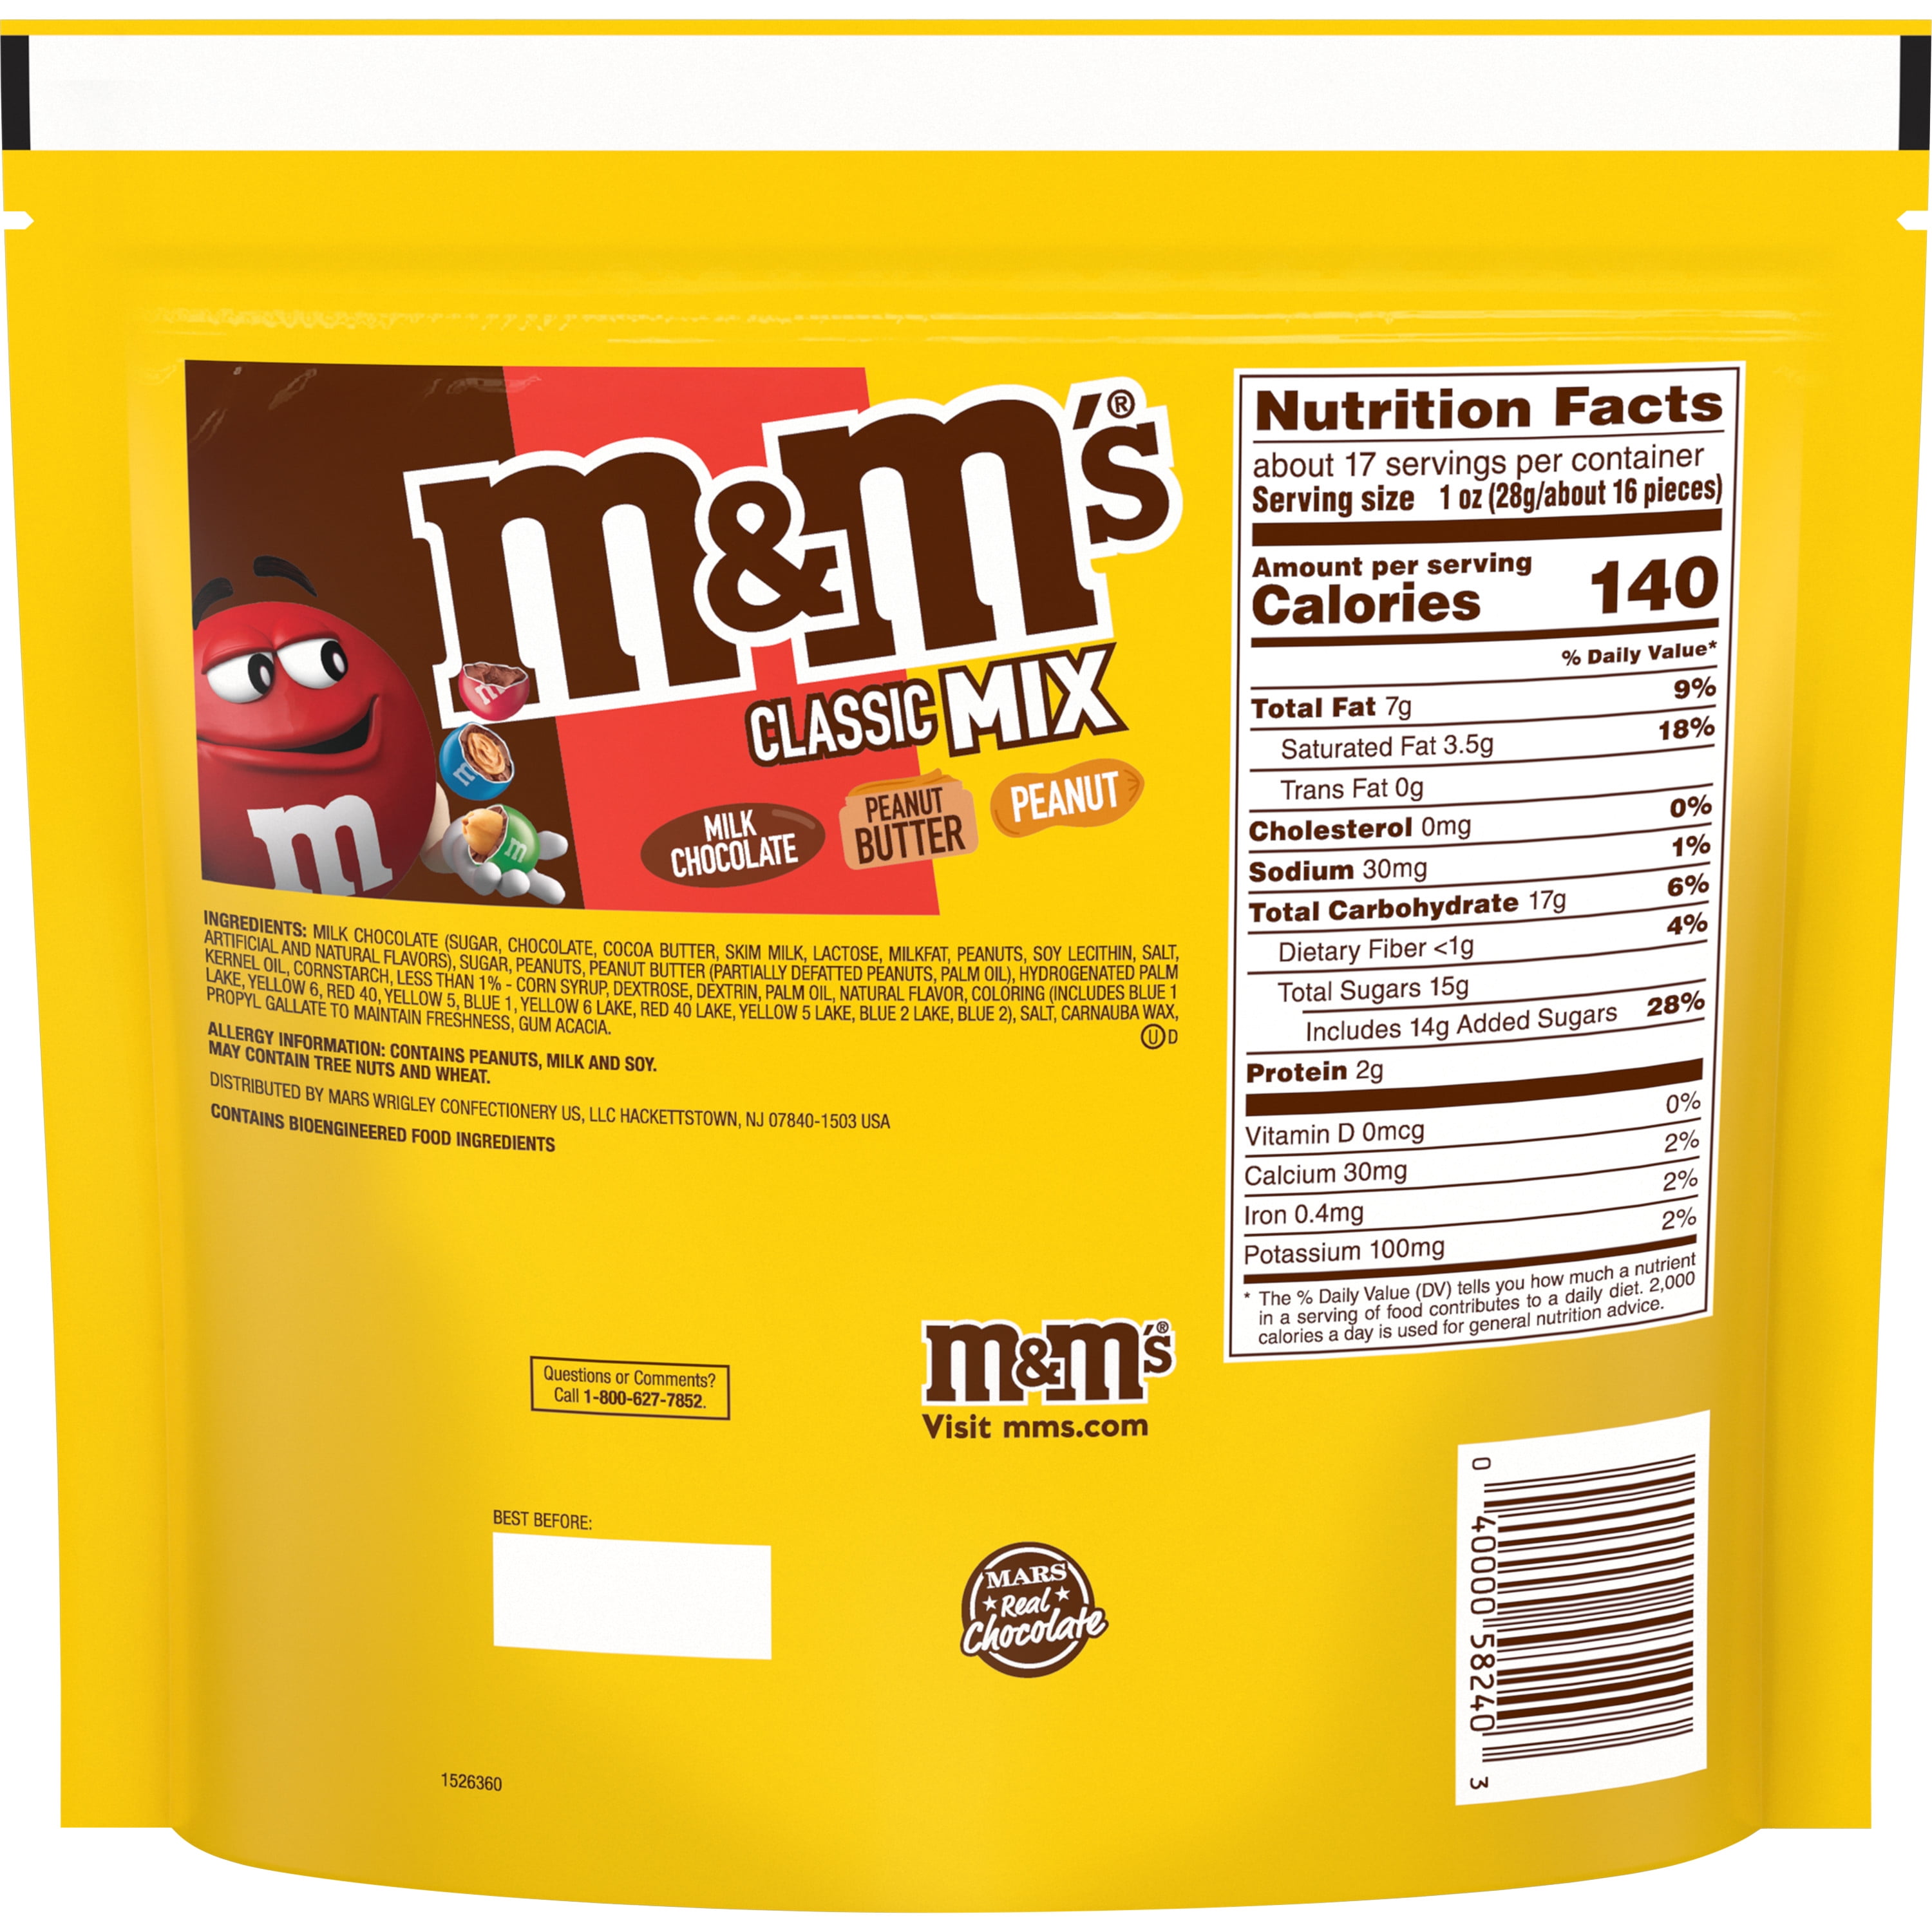 M&M'S USA - Three classics, one bag. M&M'S Mix available now!